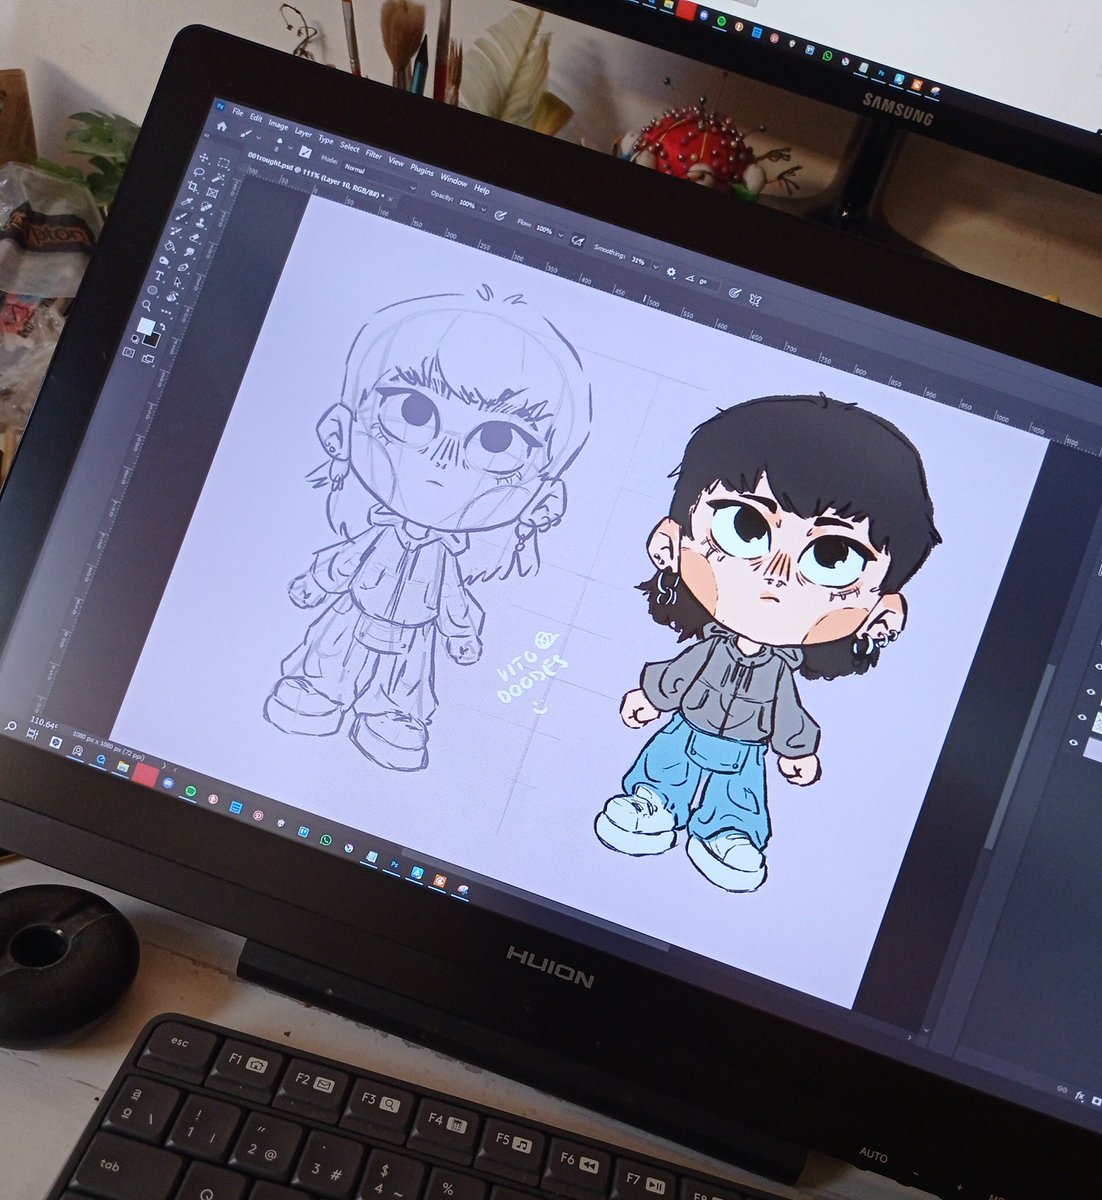 Remember this?
Okay I'm loving chibi!
No body can stop me now🖤✨
#illustration #chibi #doodle #wip #artistatwork #artwork #moots #artmoots